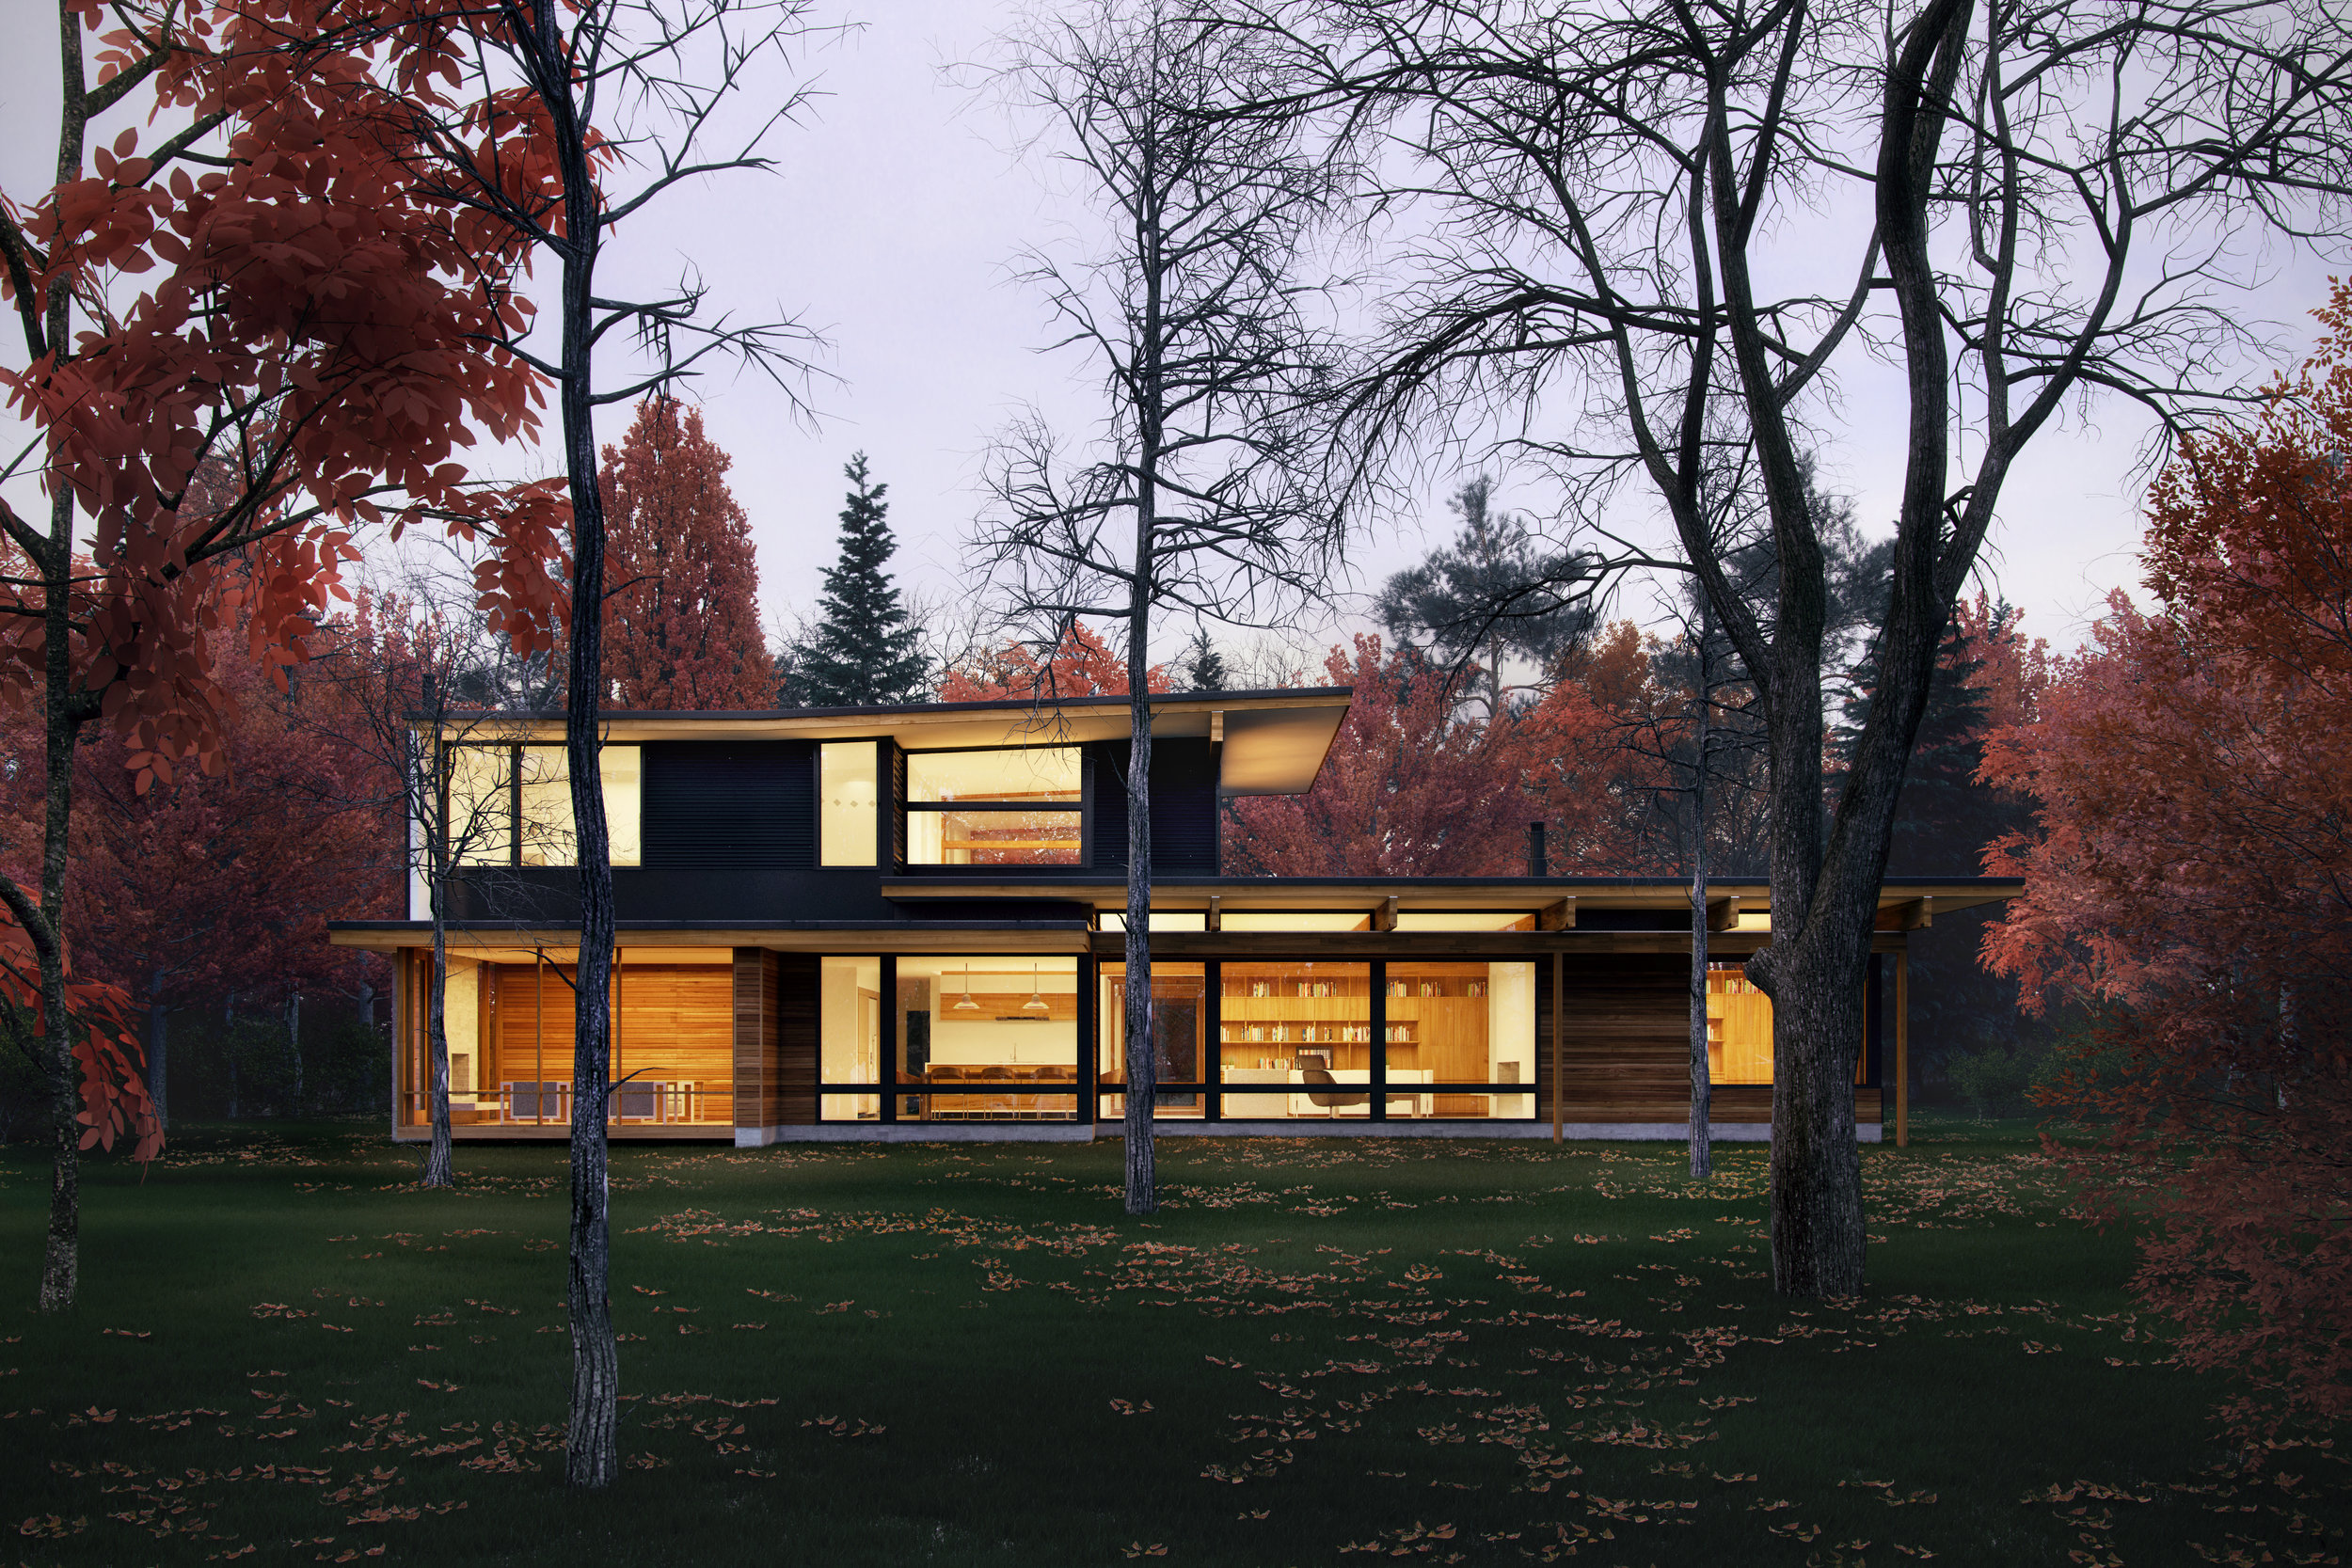 Rendering of a modern home surrounded by autumn trees